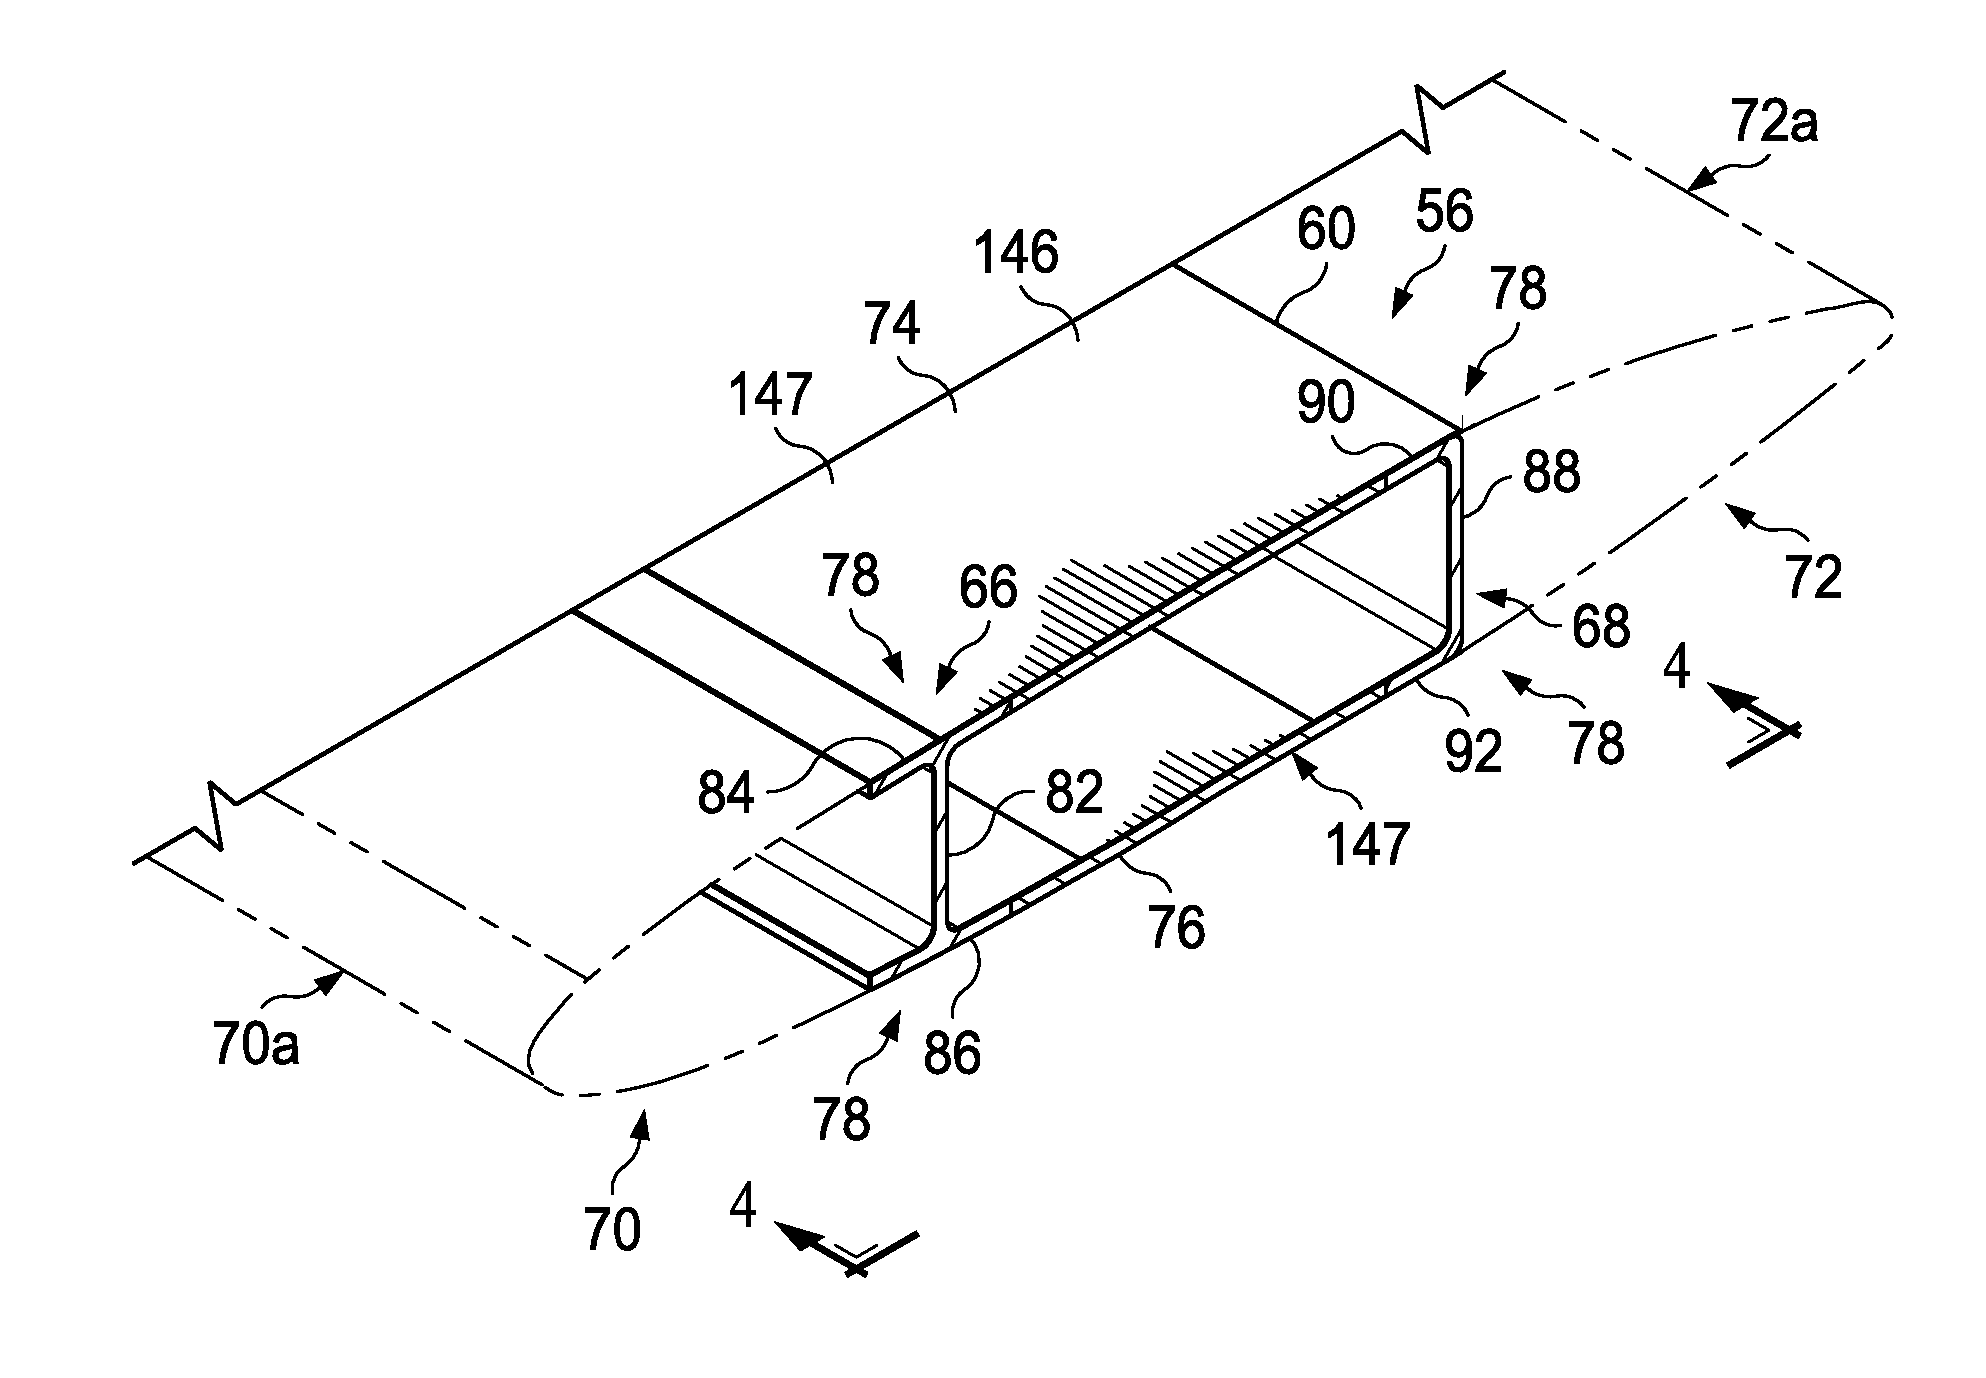 Bonded Composite Airfoil and Fabrication Method